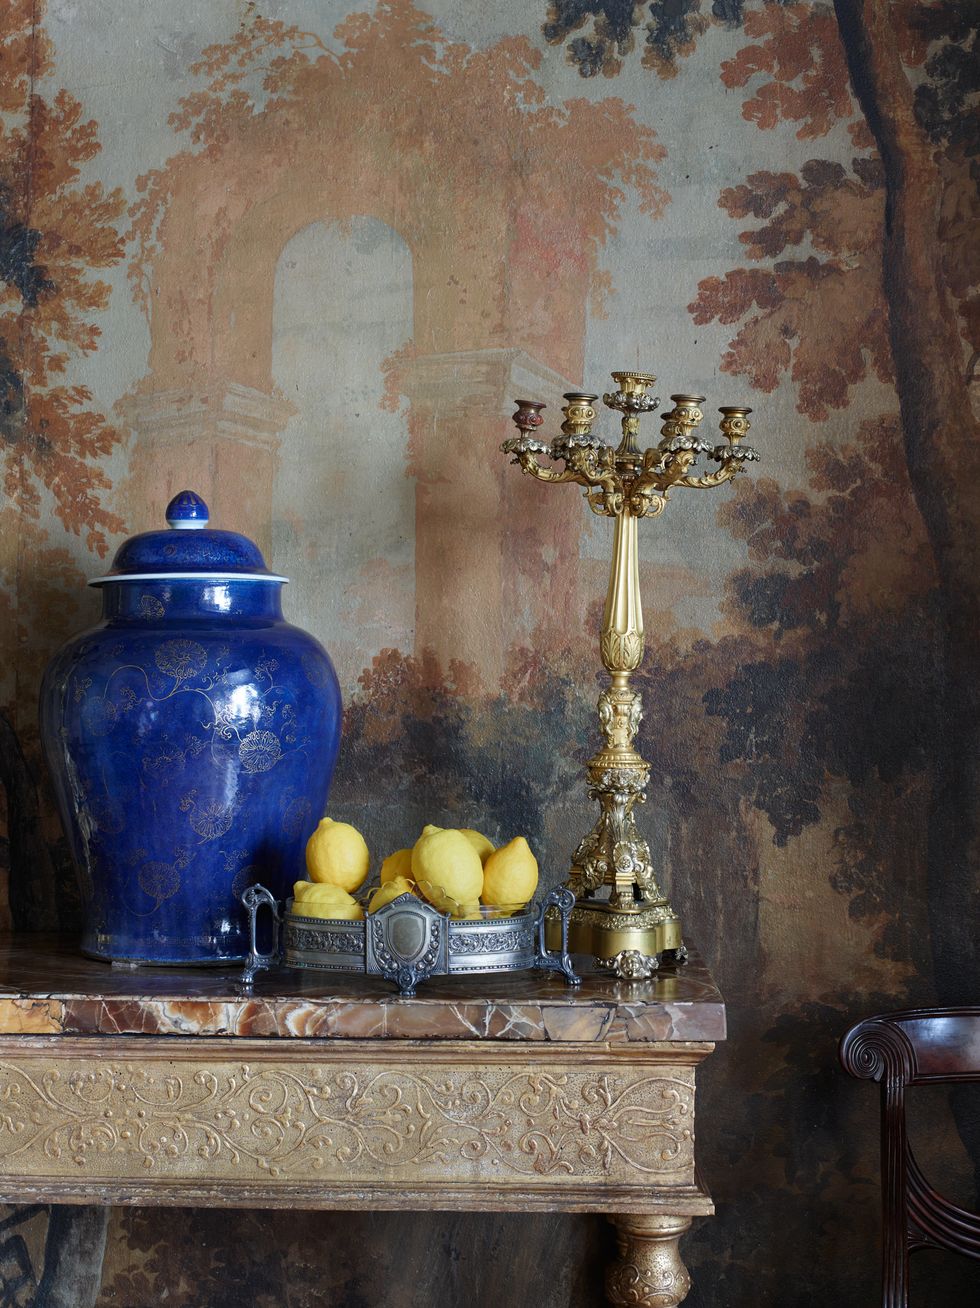 detail of gilt table with large blue vase